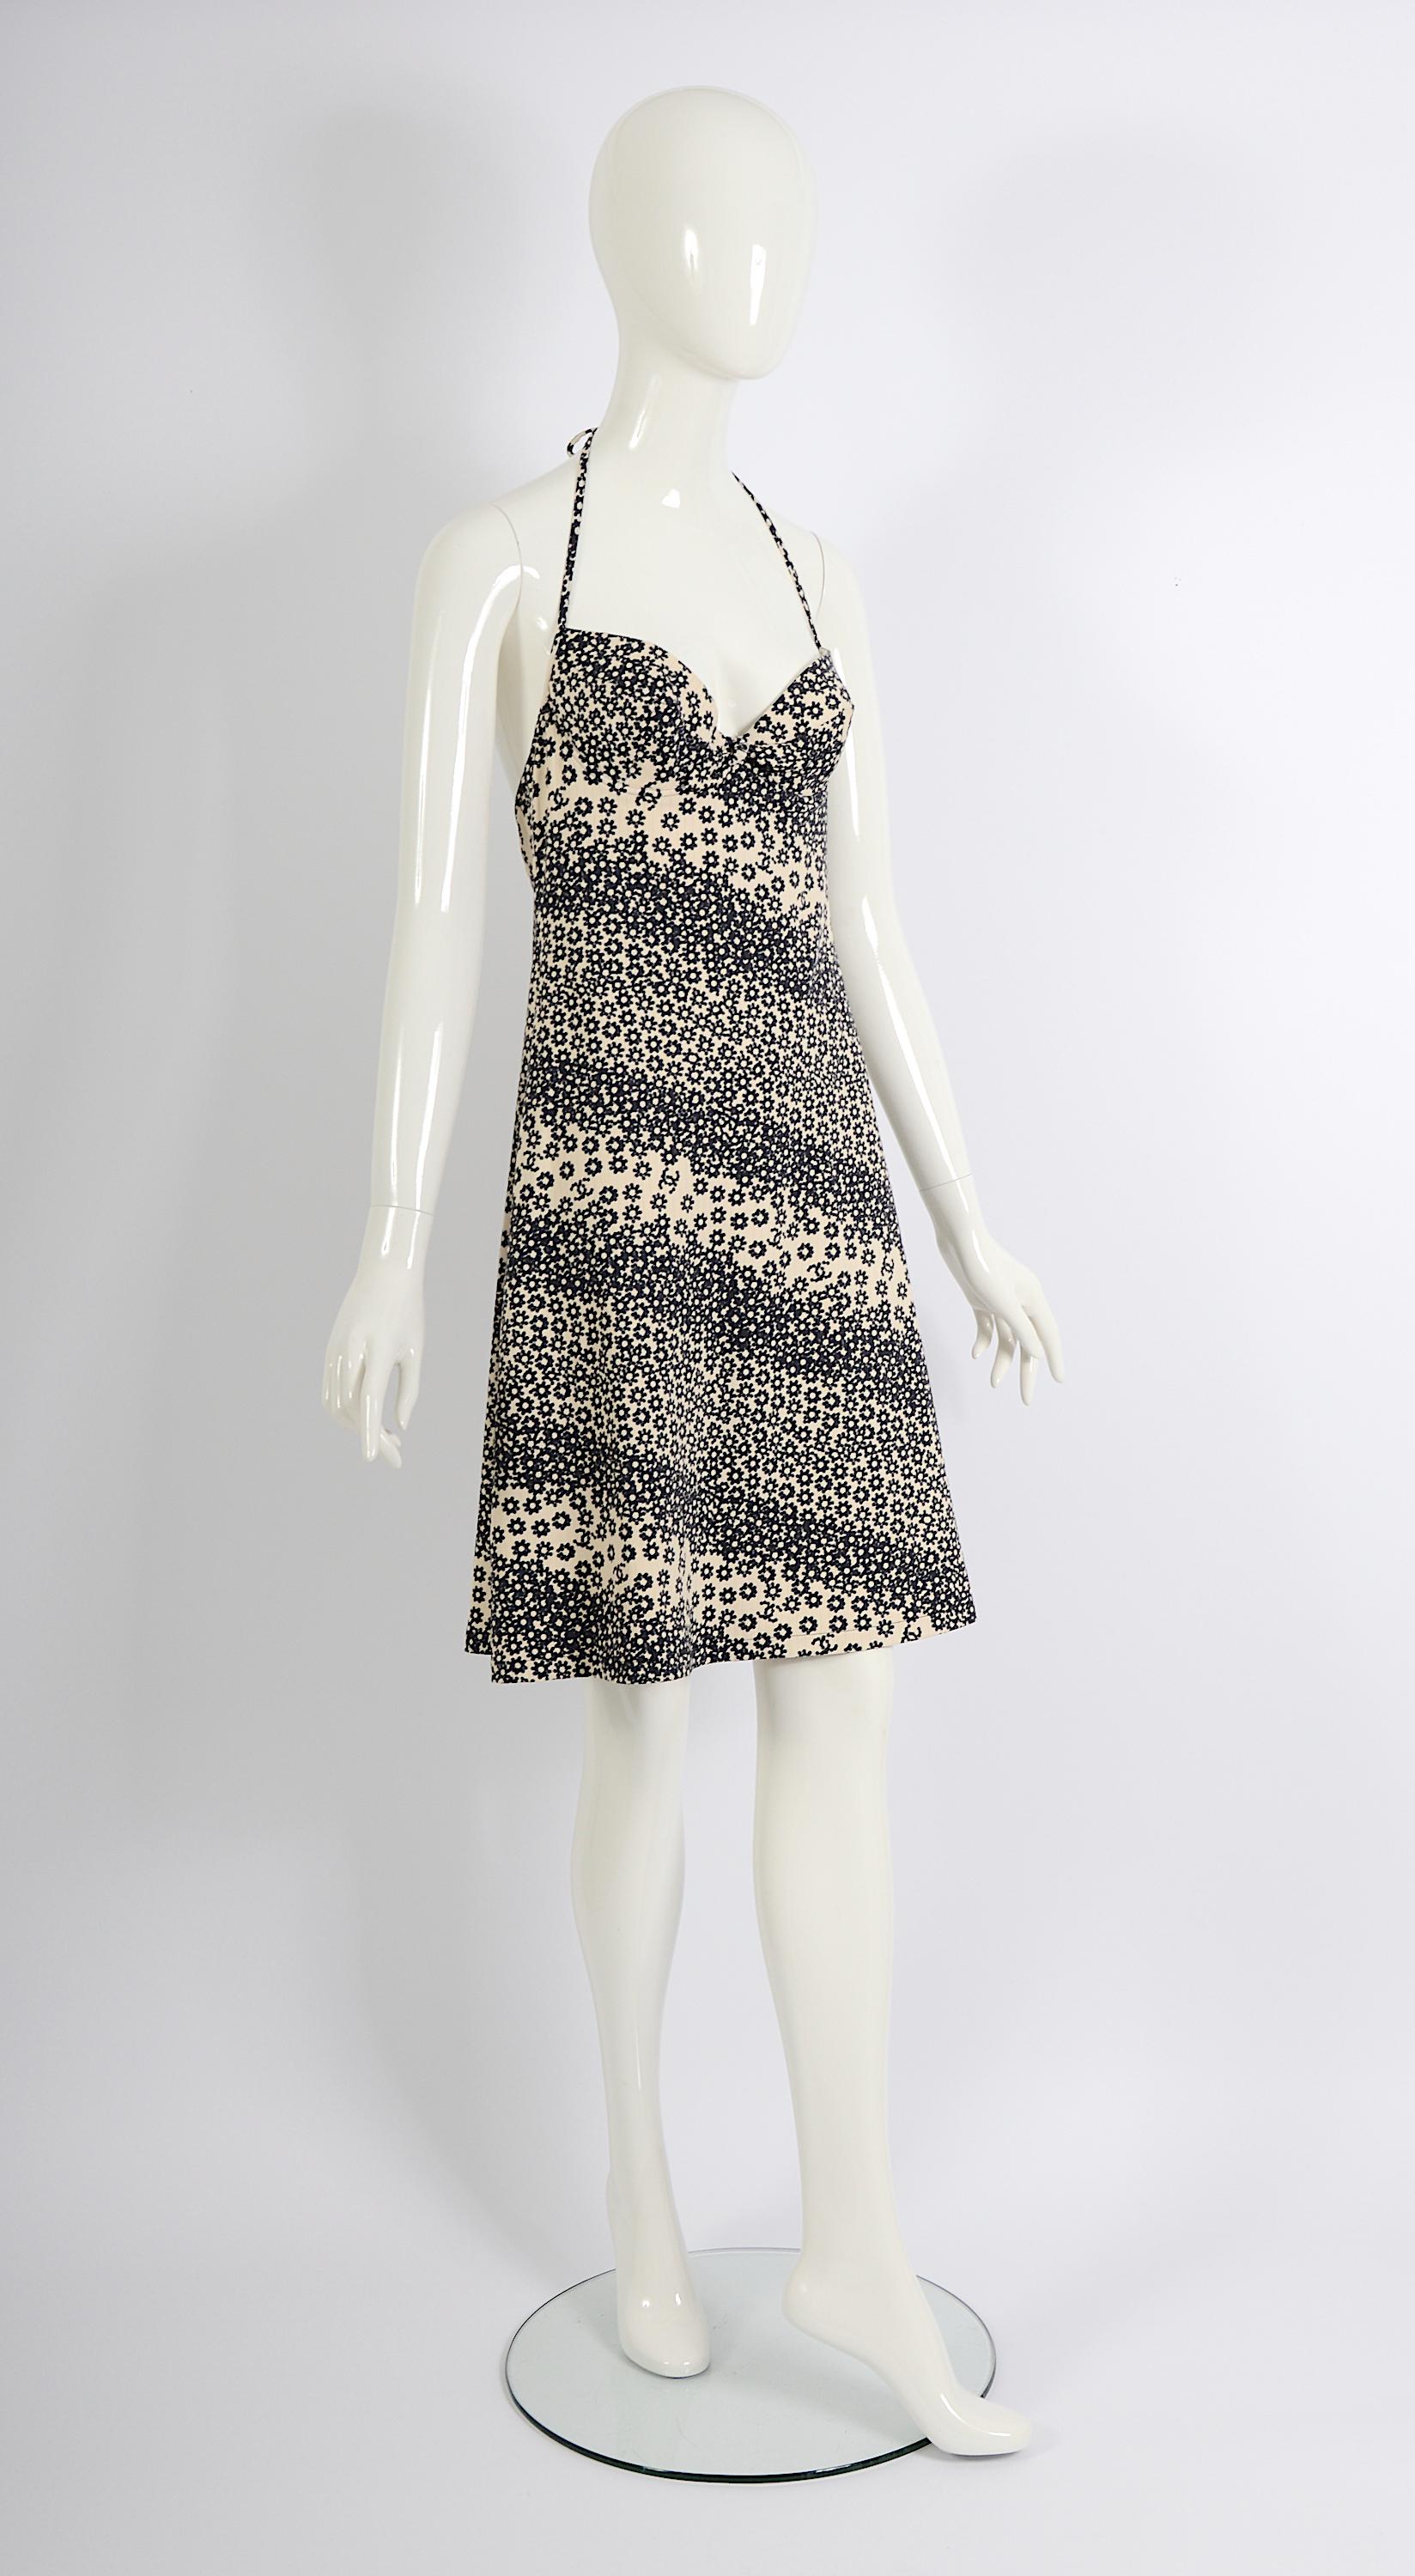 Chanel by Karl Lagerfeld black & white logo flower print halter dress, ss 2003 In Excellent Condition For Sale In Antwerp, BE